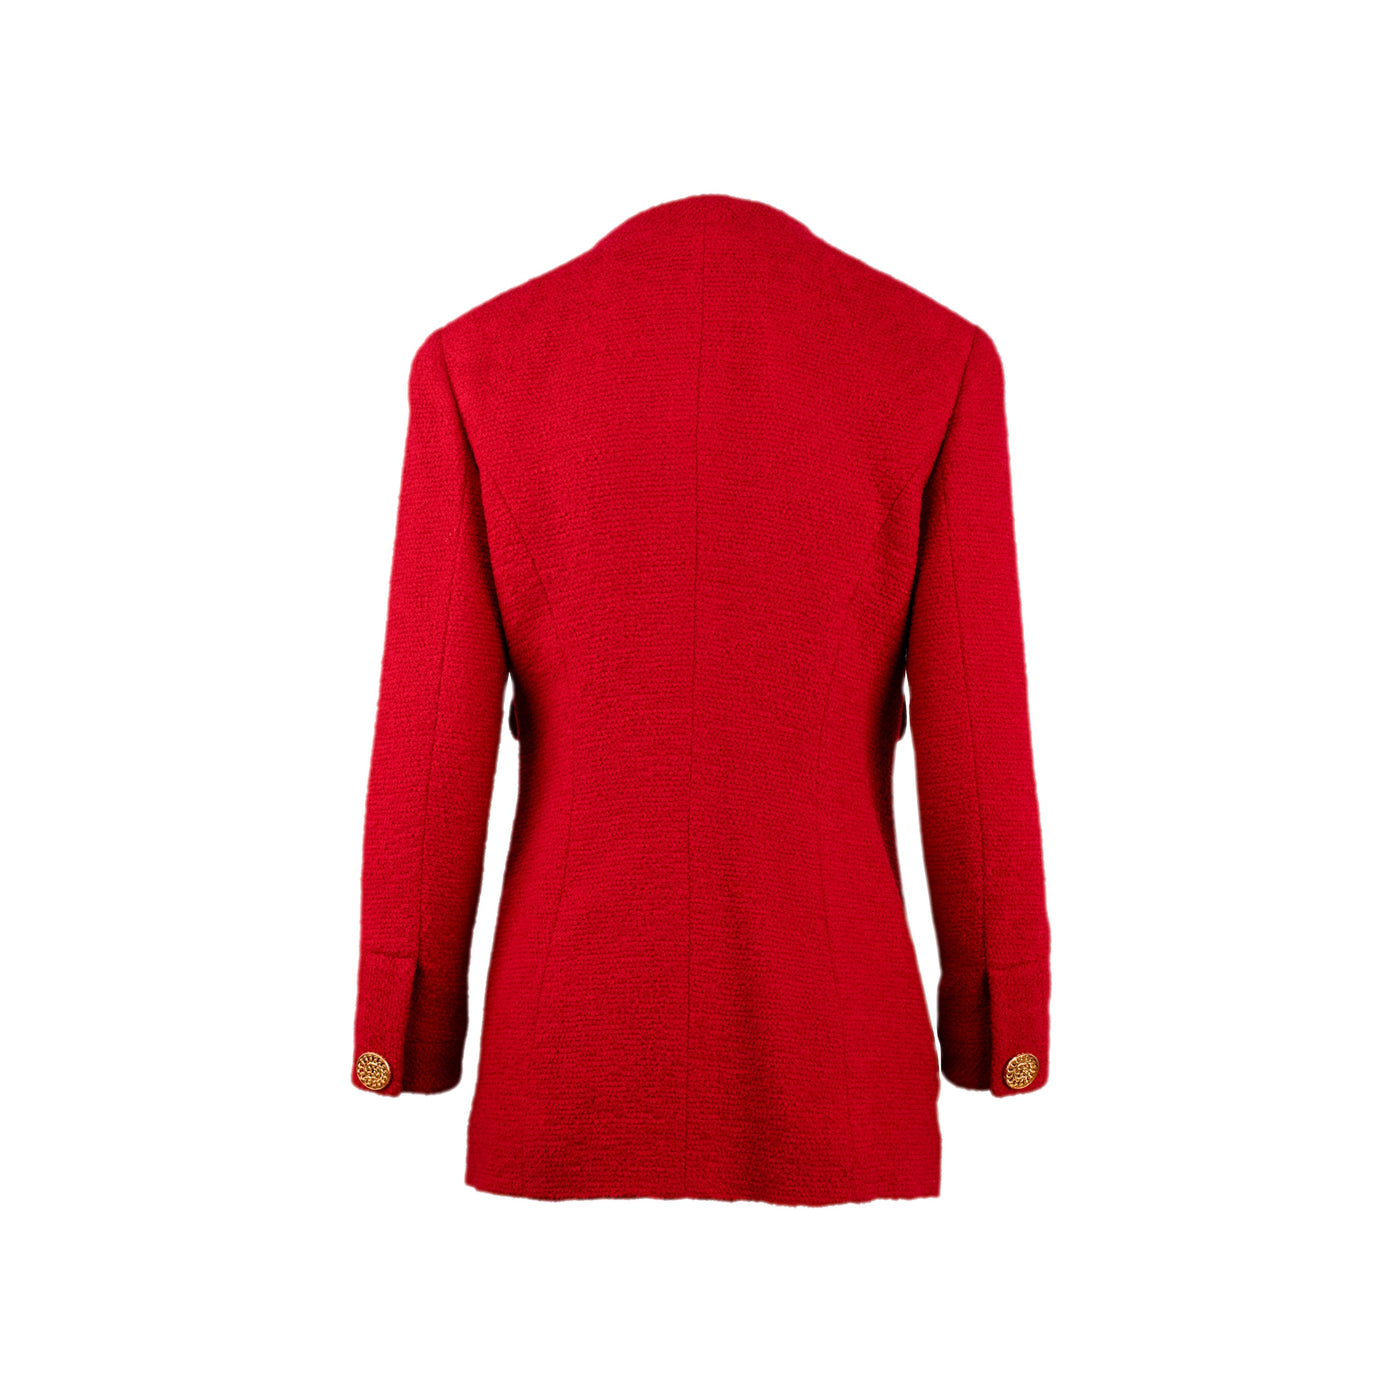 Chanel red wool bouclé tweed jacket. Blazer style with lapel-less collar, marked shoulders, long sleeves and four front pockets. Decorated with a zip fastening and gold CC logo buttons pre-owned nft